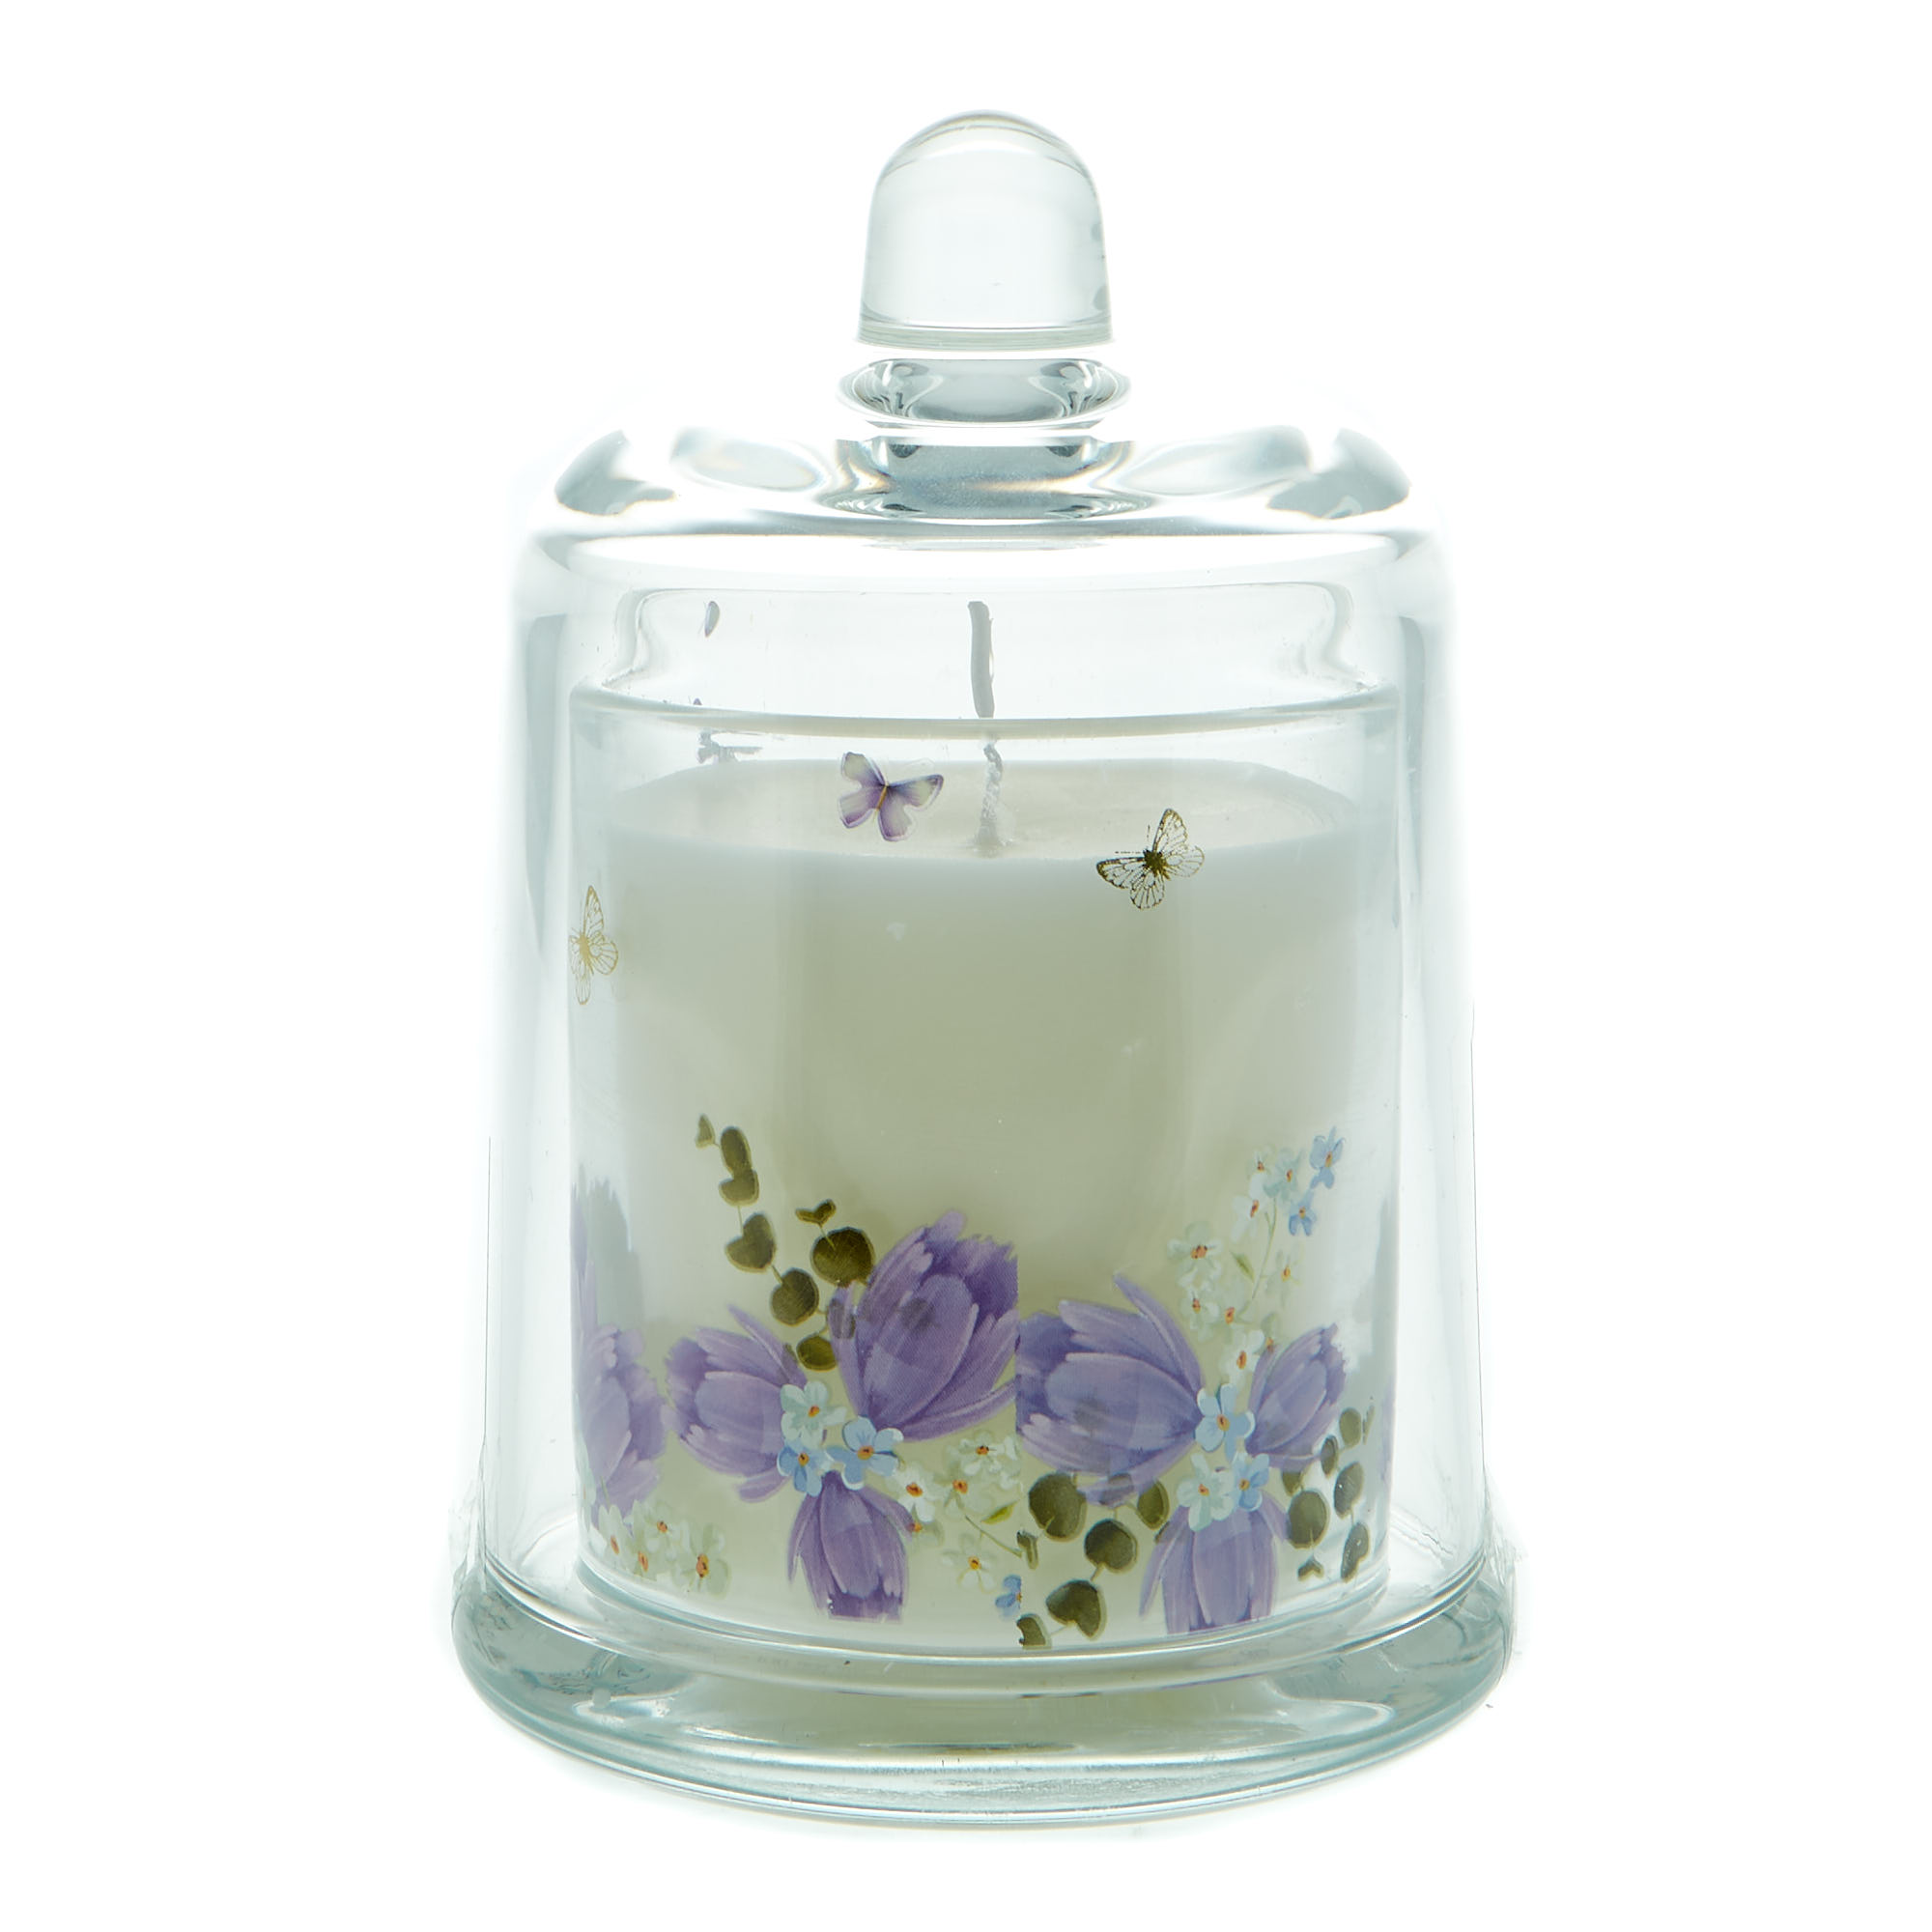 Jasmine Scented Candle In A Cloche